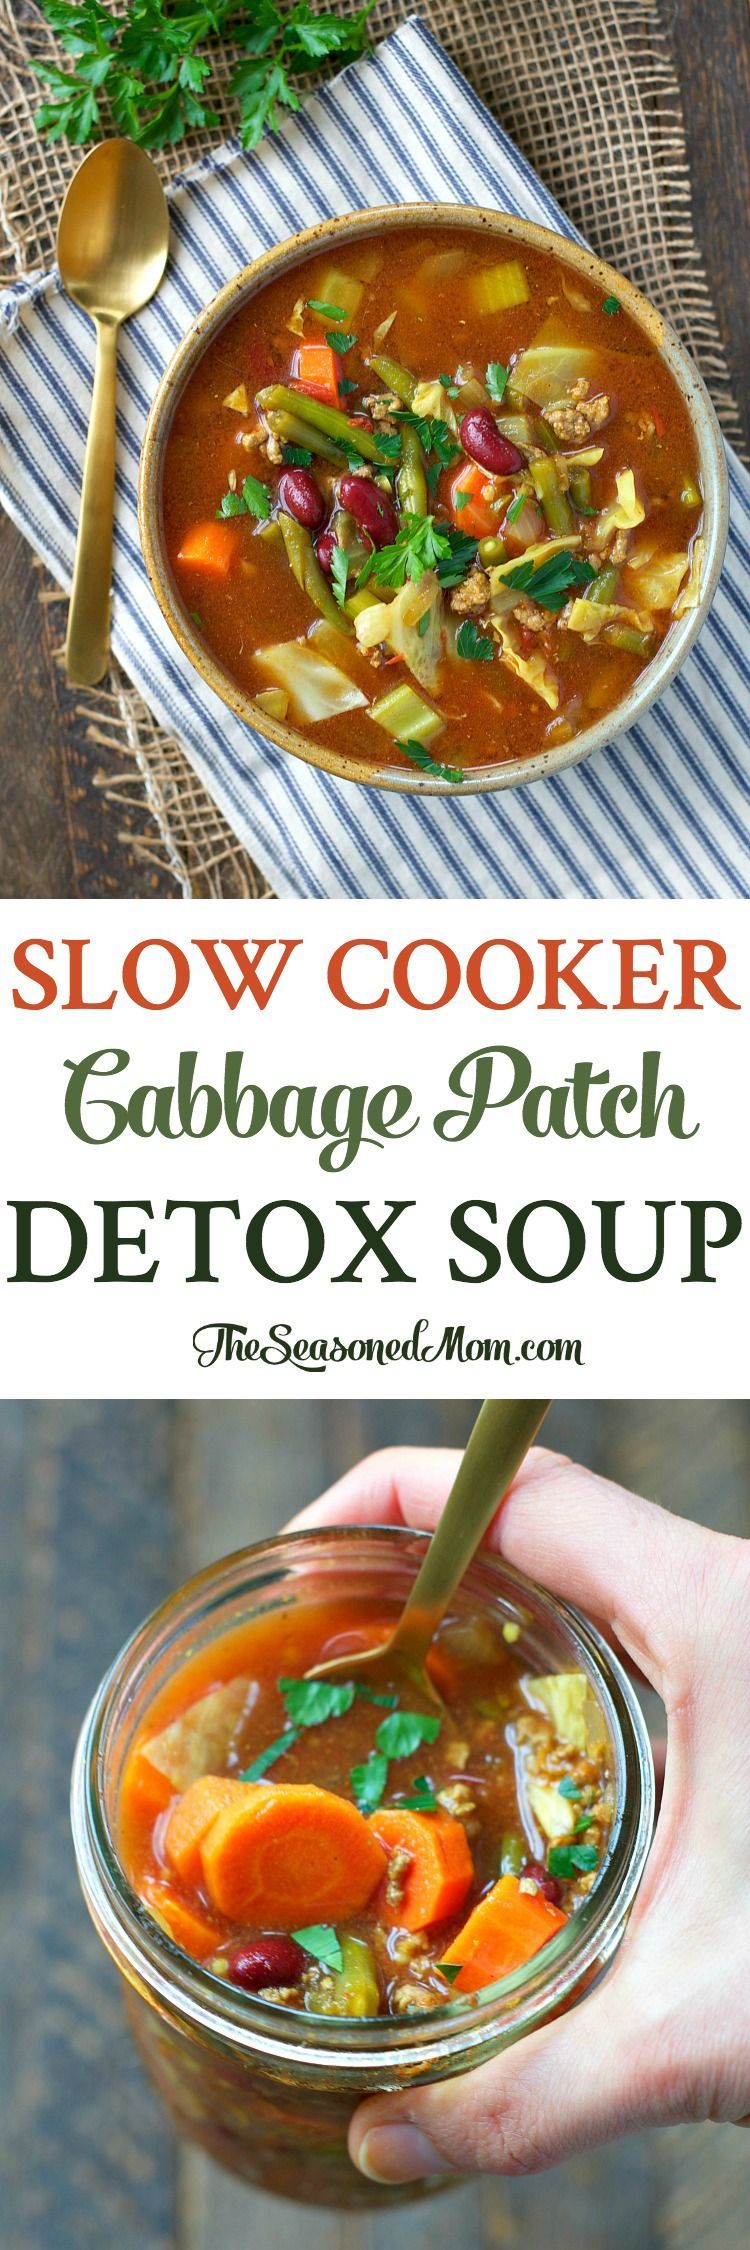 Get your diet back on track with this Slow Cooker “Cabbage Patch” Detox Soup! You only need 10 minutes to toss the ingredients